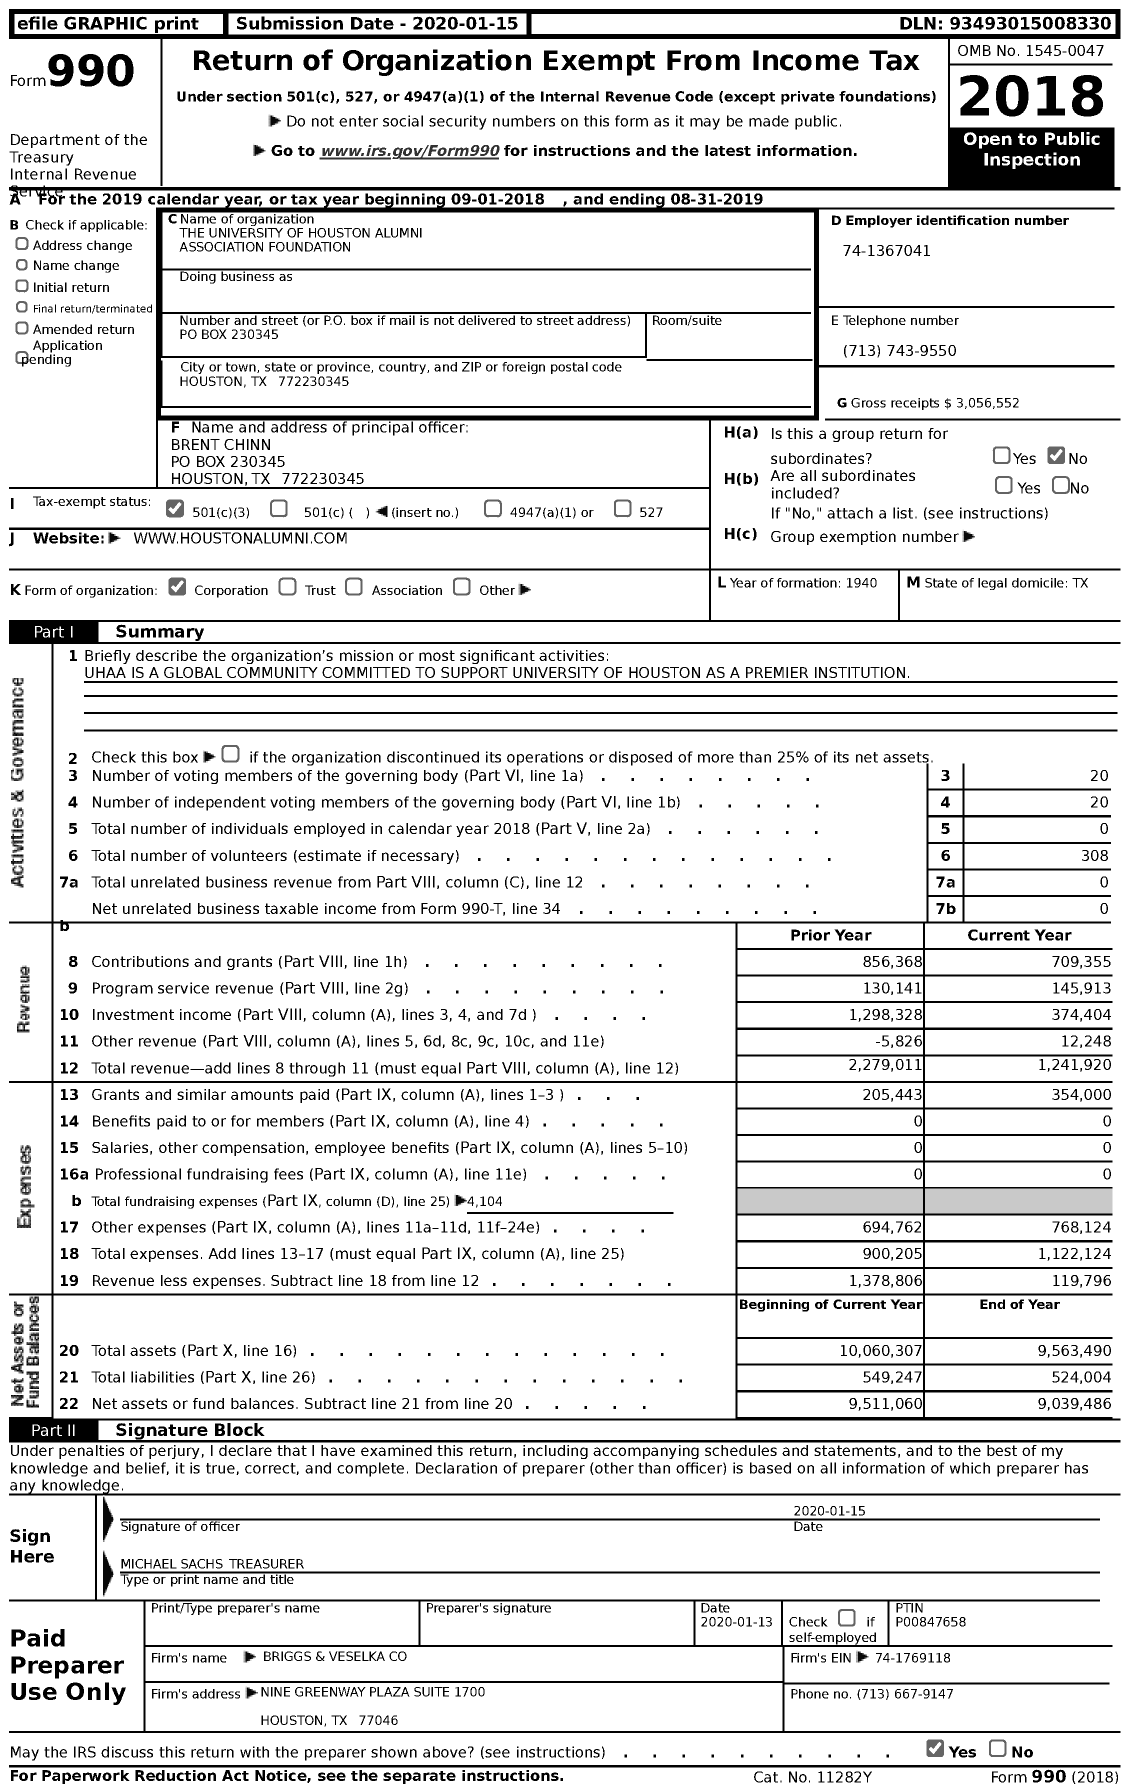 Image of first page of 2018 Form 990 for The University of Houston Alumni Association Foundation